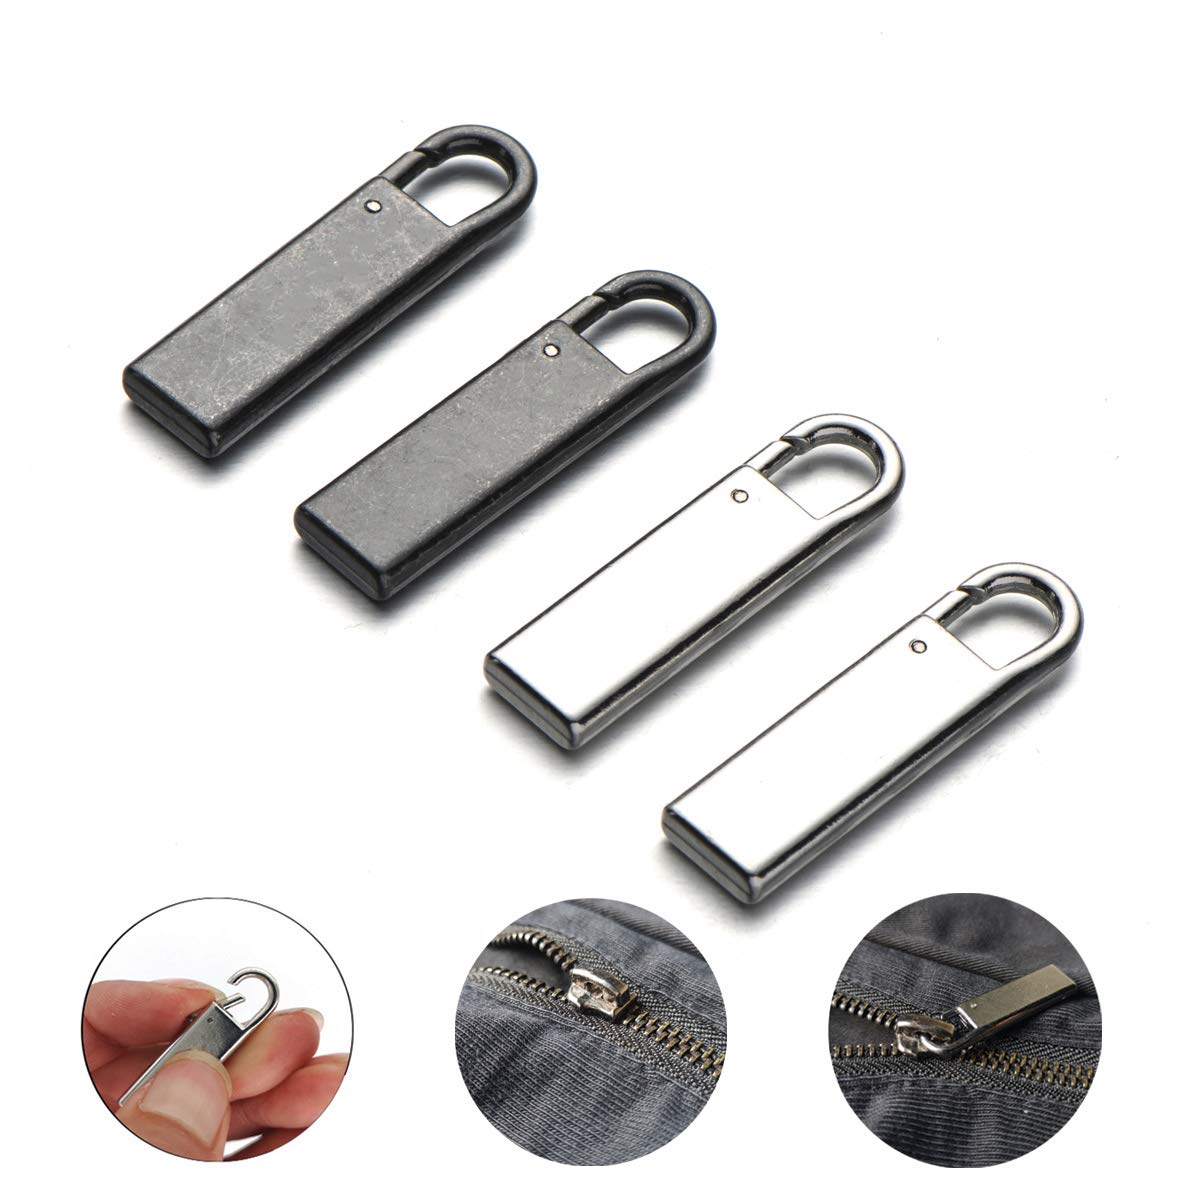  Zpsolution Zipper Handle Pull Replacement Metal Zipper Tab  Repair Easy Use for Broken and Missing Zipper Pulls On Luggage Suitcase